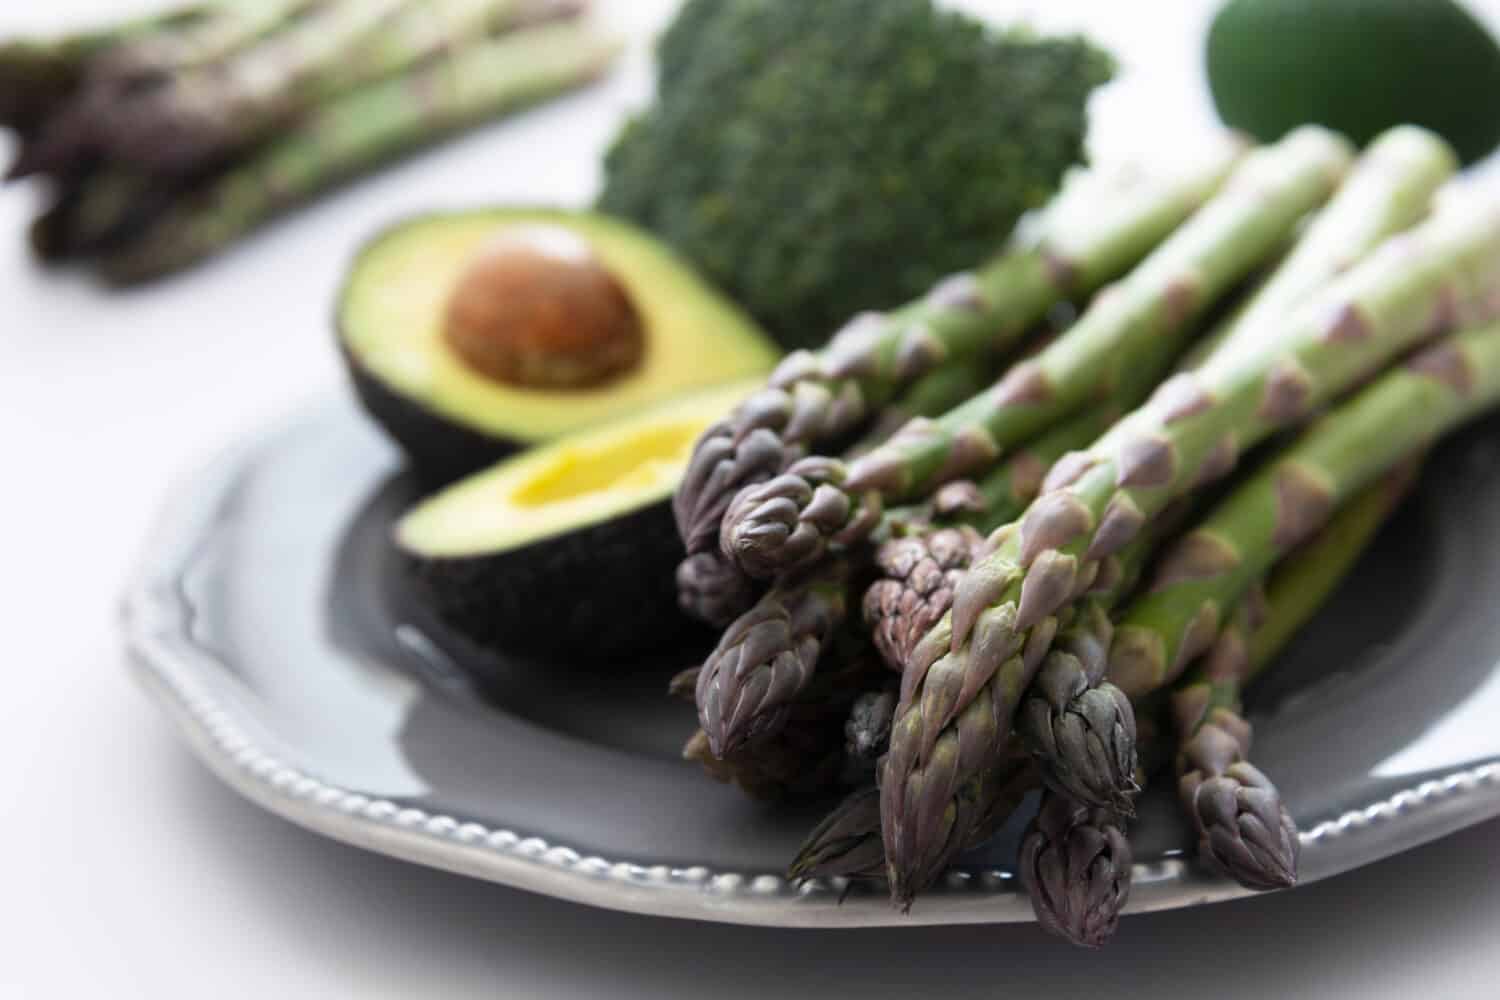 Green vegetables - asparagus, avocado and broccoli. Fresh vegetable mix. Healthy eating concept.